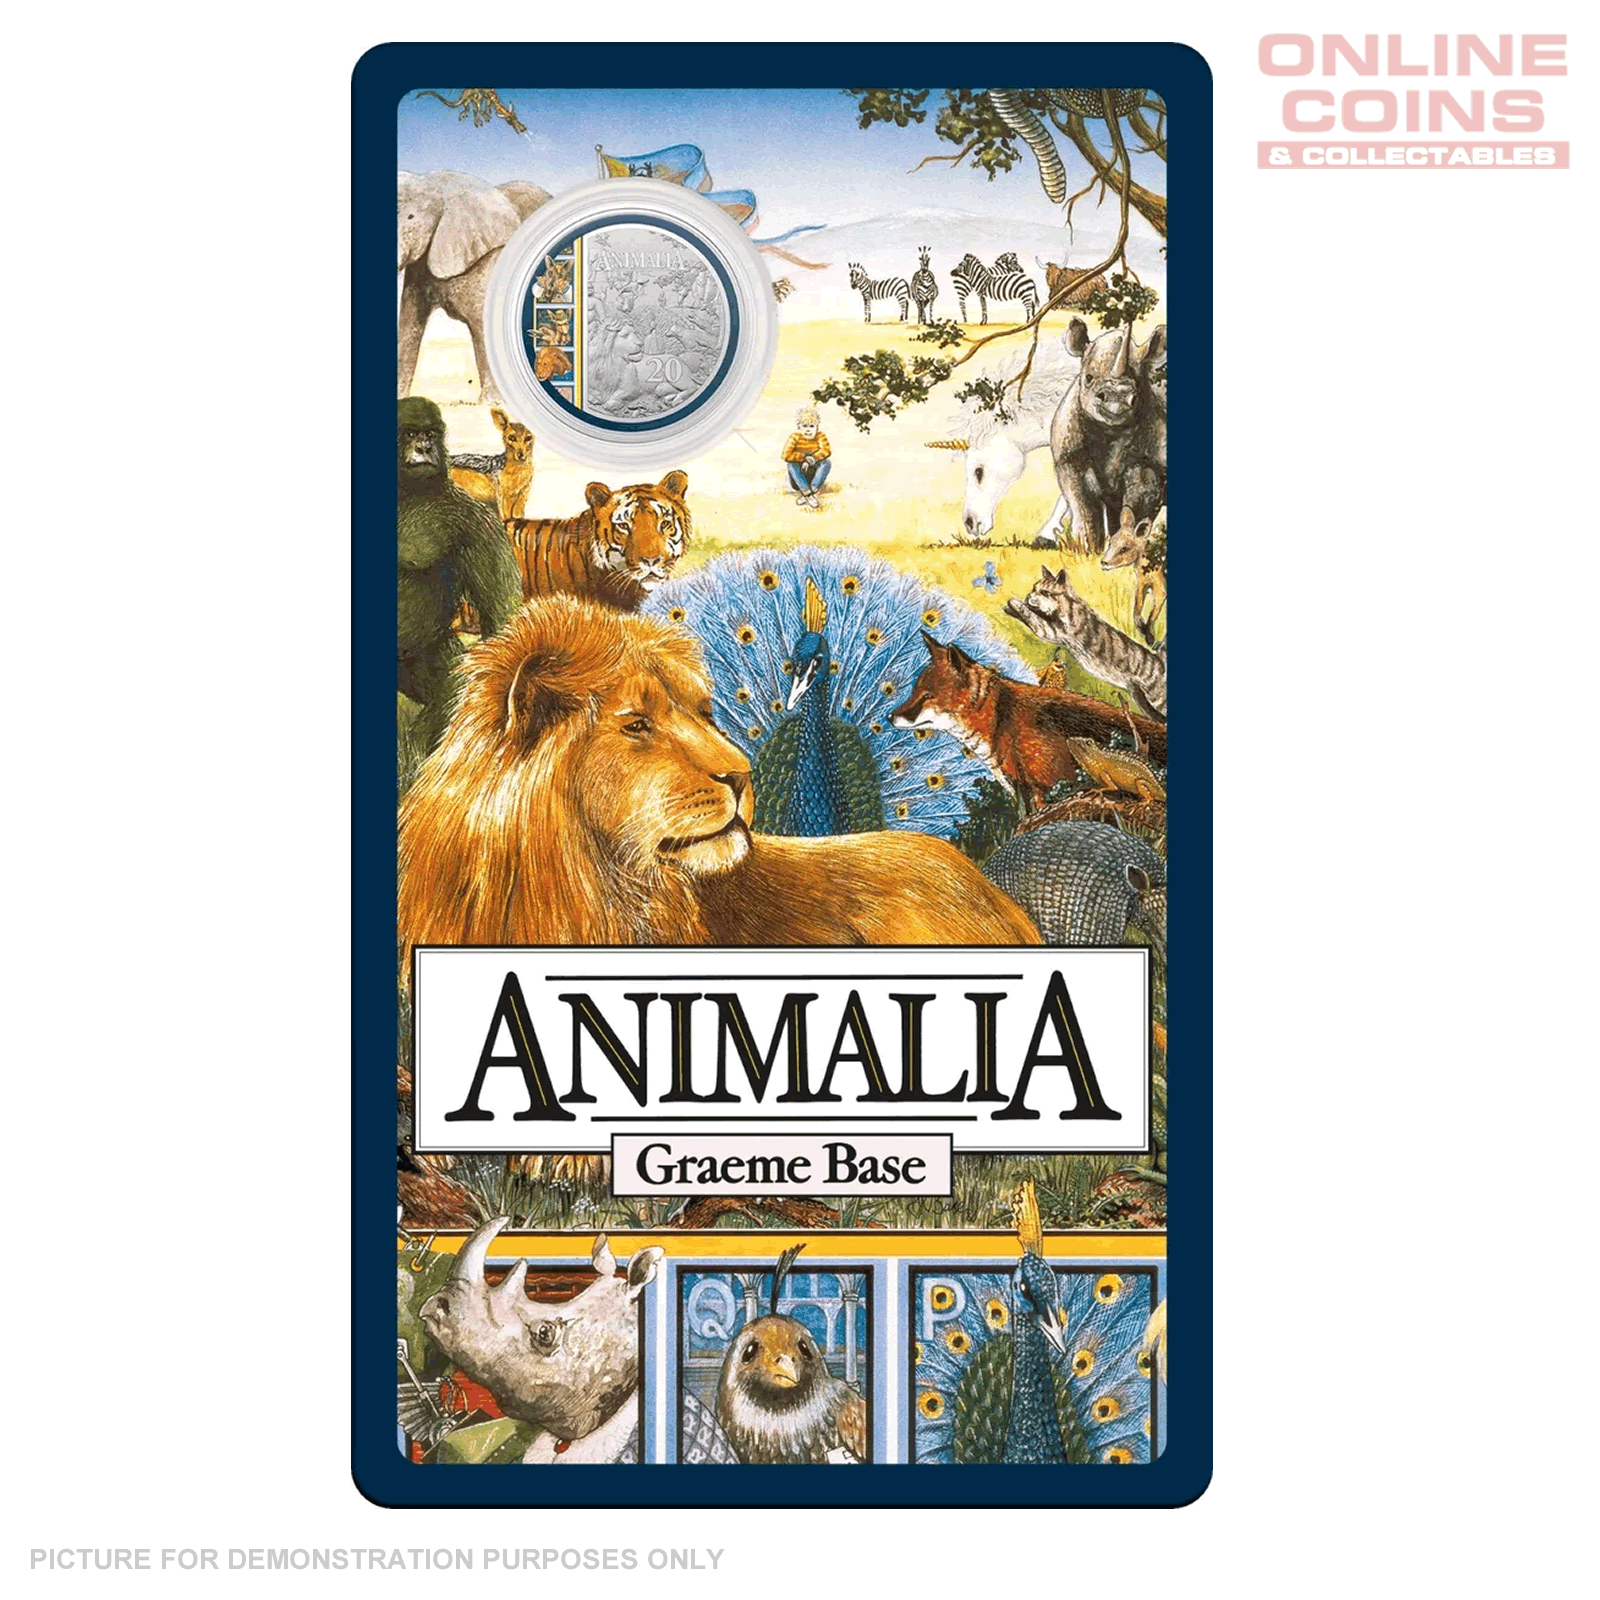 2021 Royal Australian Mint 35th Anniversary Of Animalia 20c Coloured Uncirculated Coin In Card